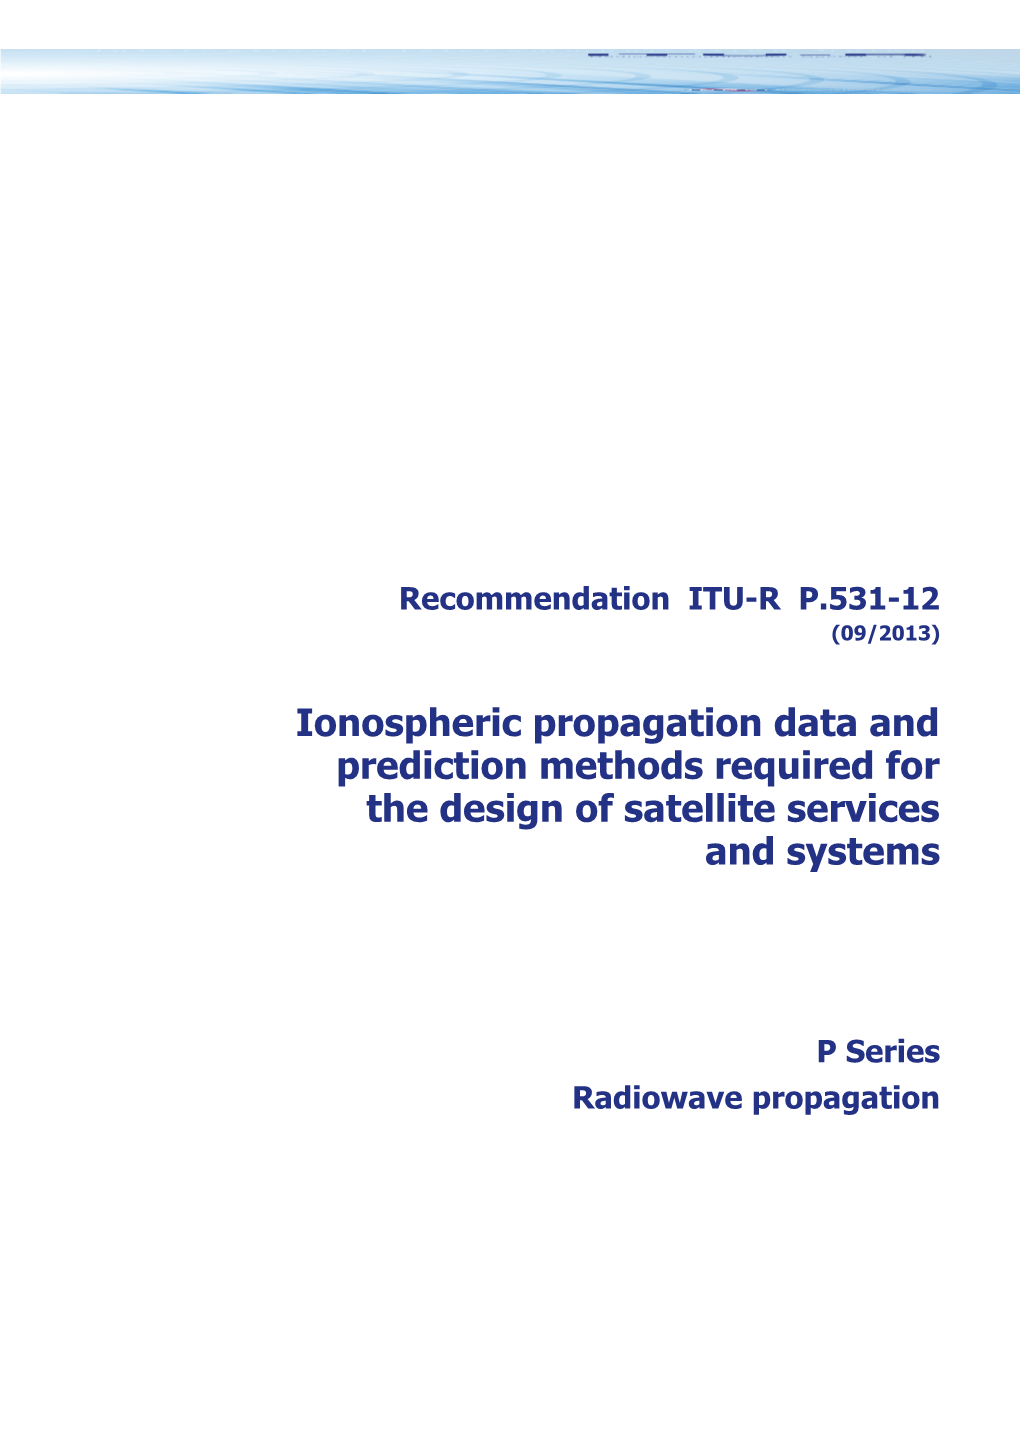 RECOMMENDATION ITU-R P.531-12 - Ionospheric Propagation Data and Prediction Methods Required